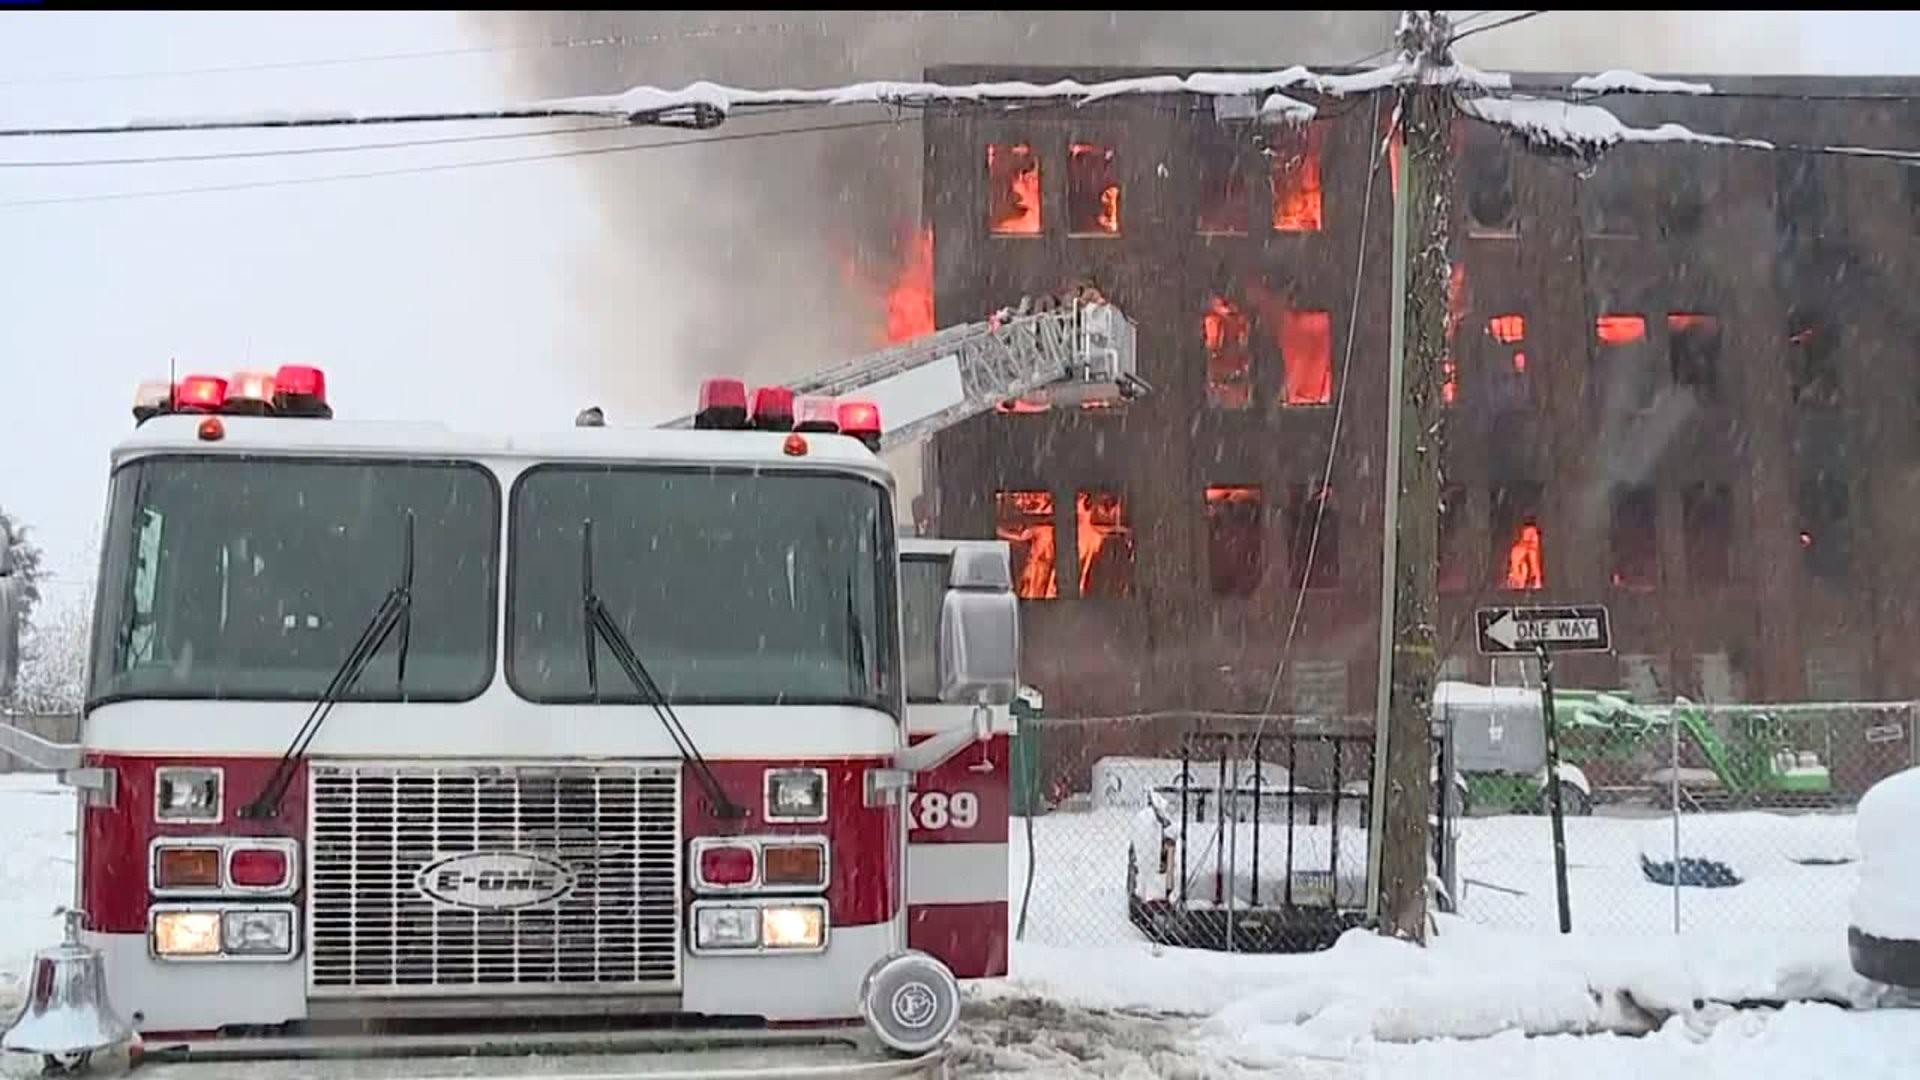 Fire destroys soon-to-be apartment building in York